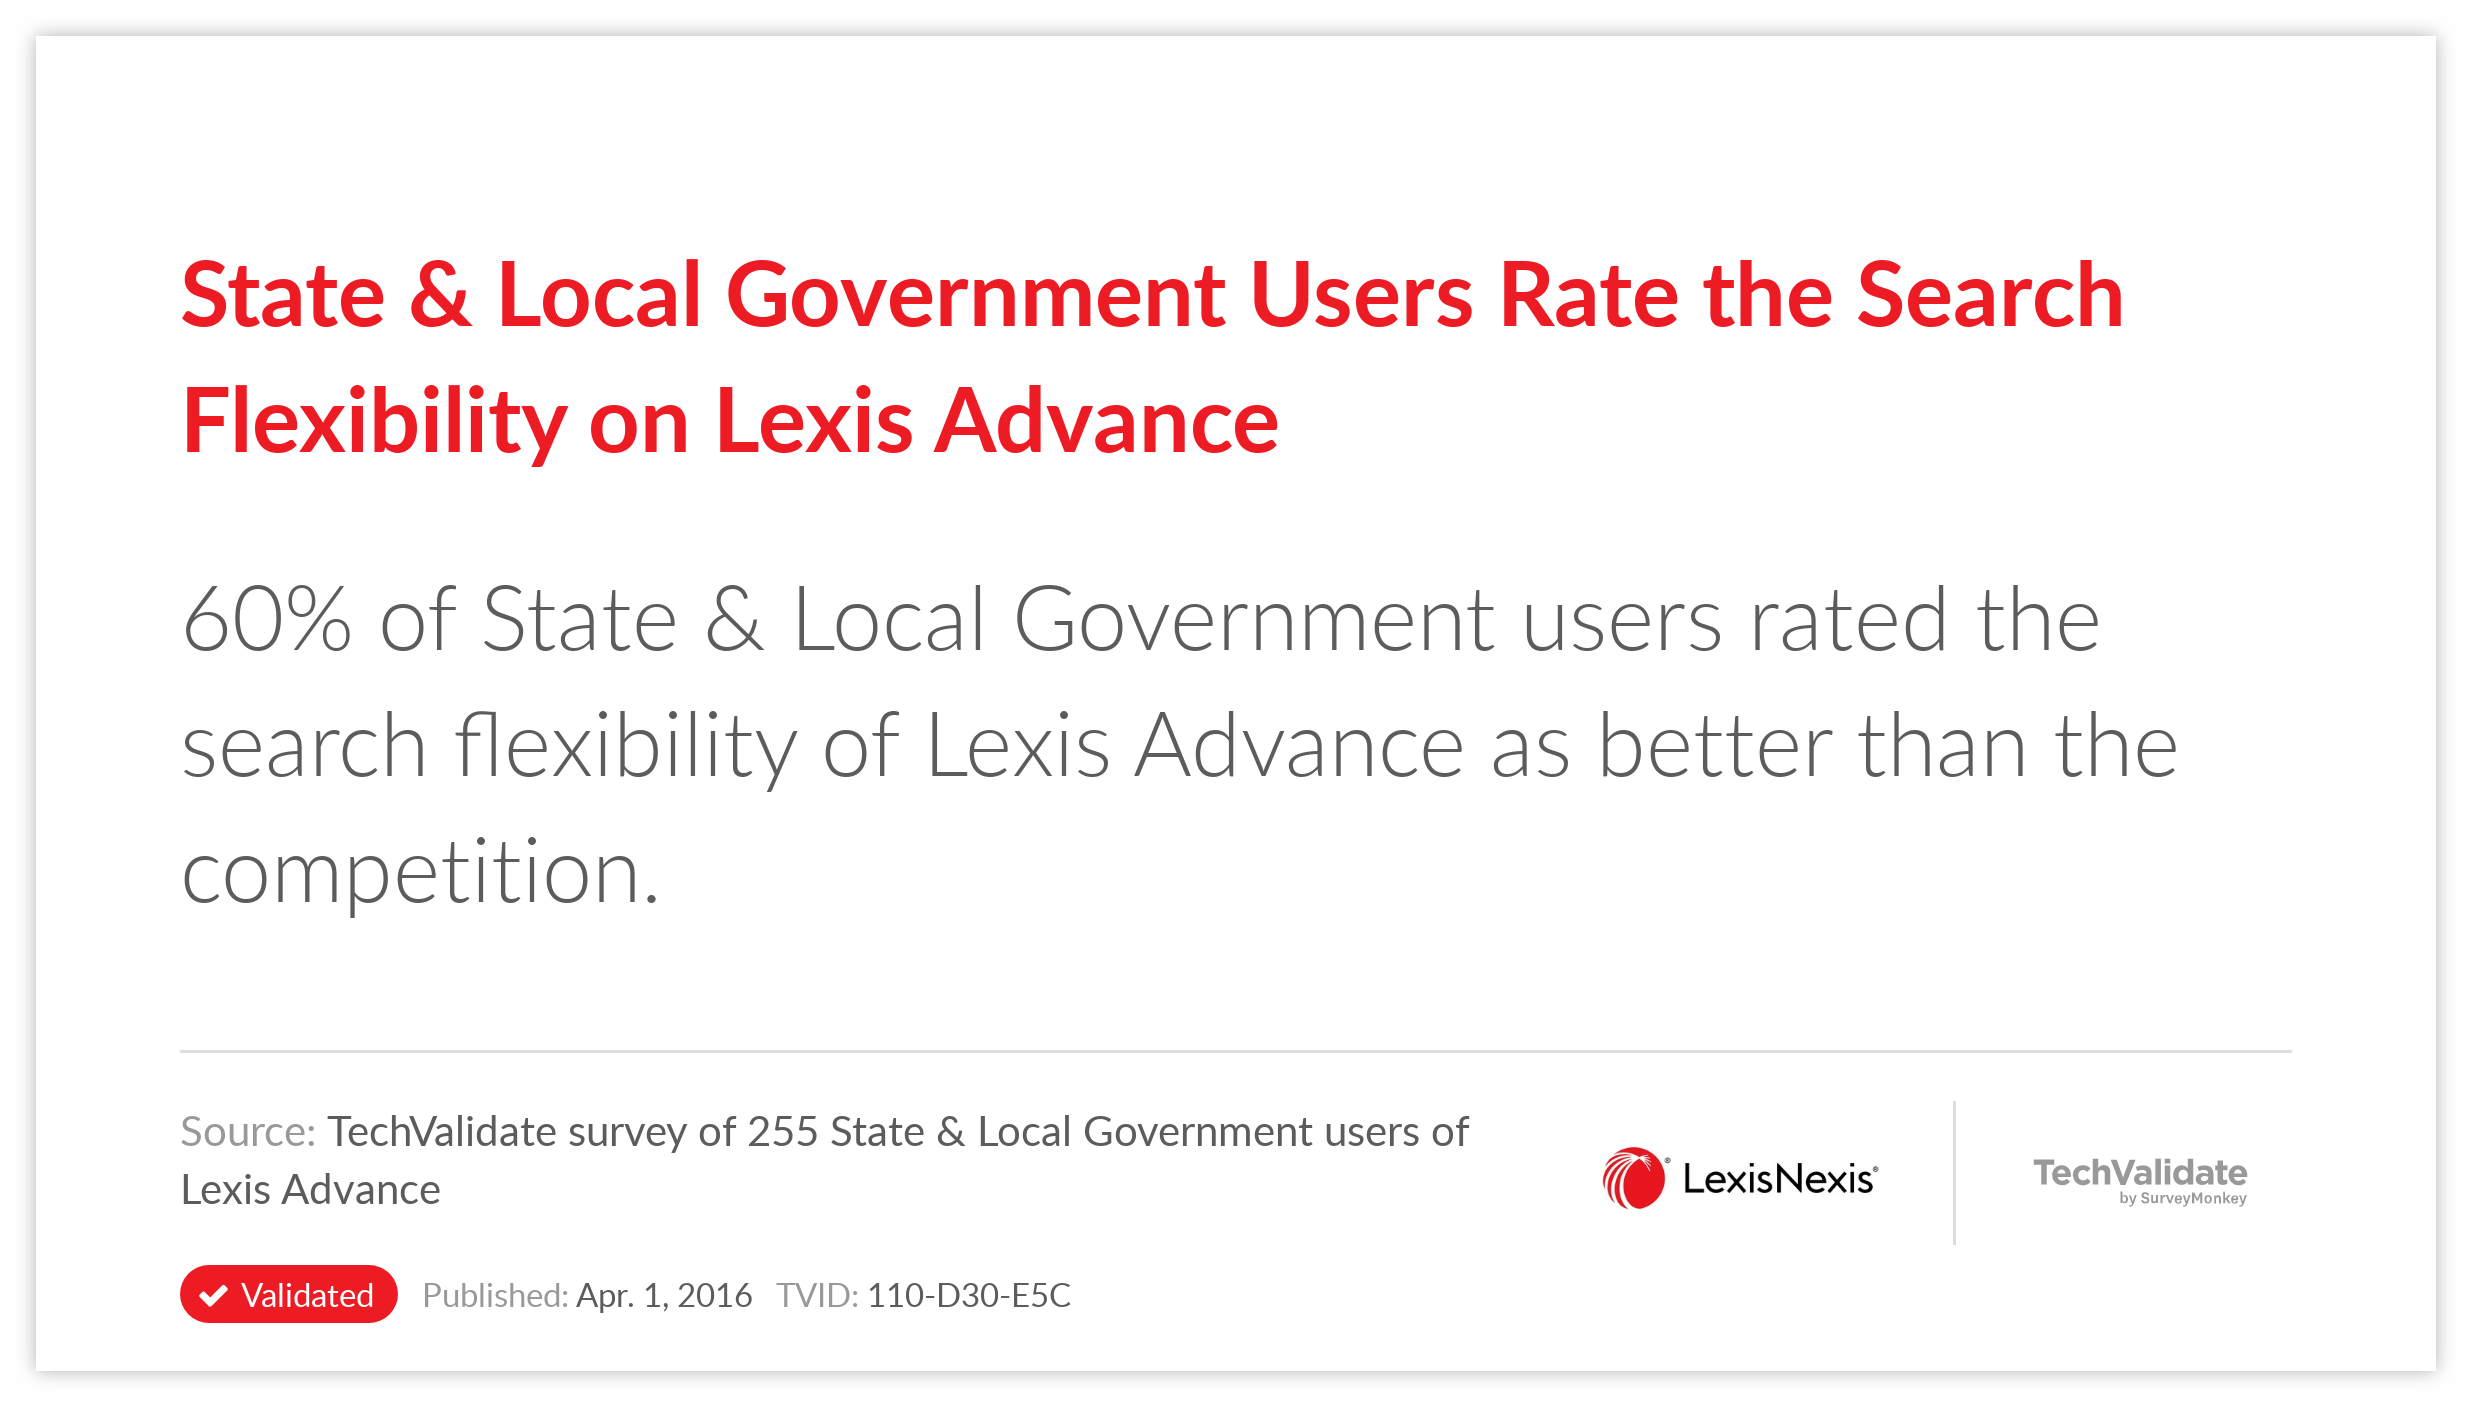 State & Local Government Users Rate the Search Flexibility on Lexis Advance